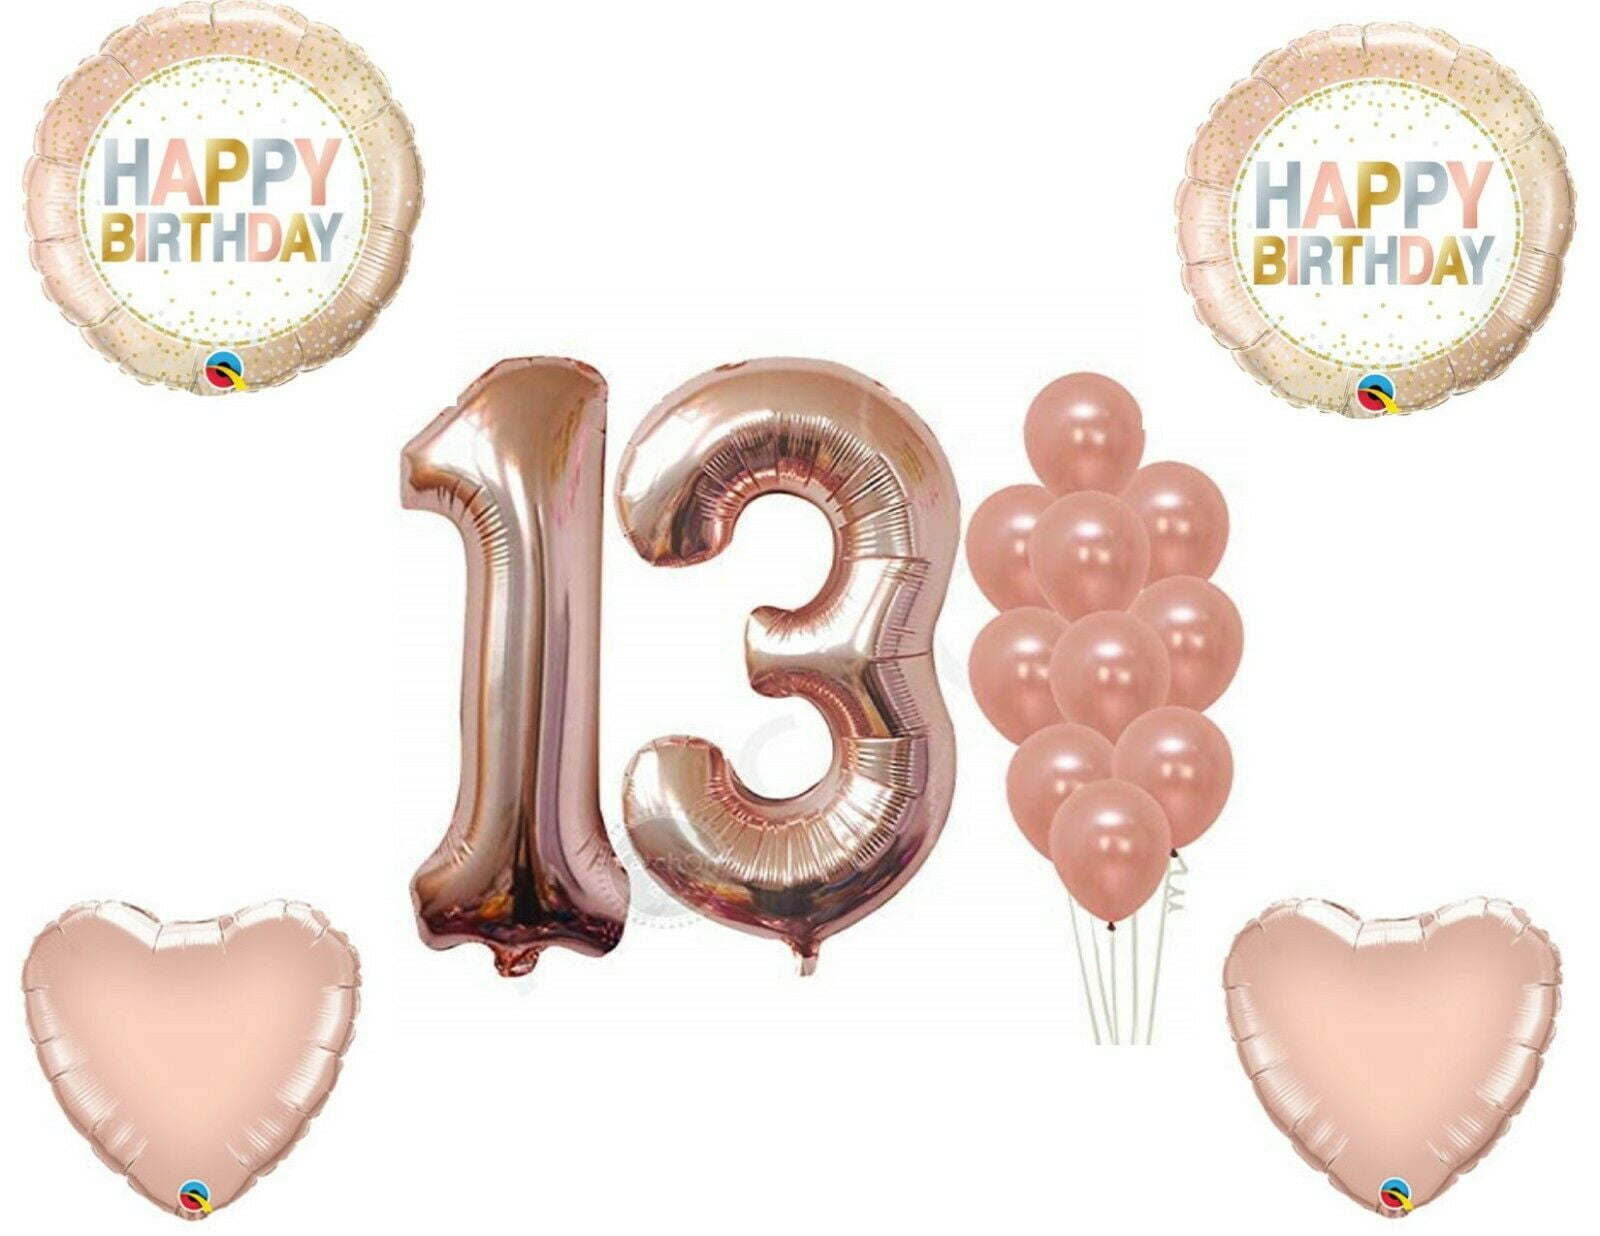 ROSE GOLD NUMERICAL CANDLE-13 BIRTHDAY PARTY SUPPLIES 